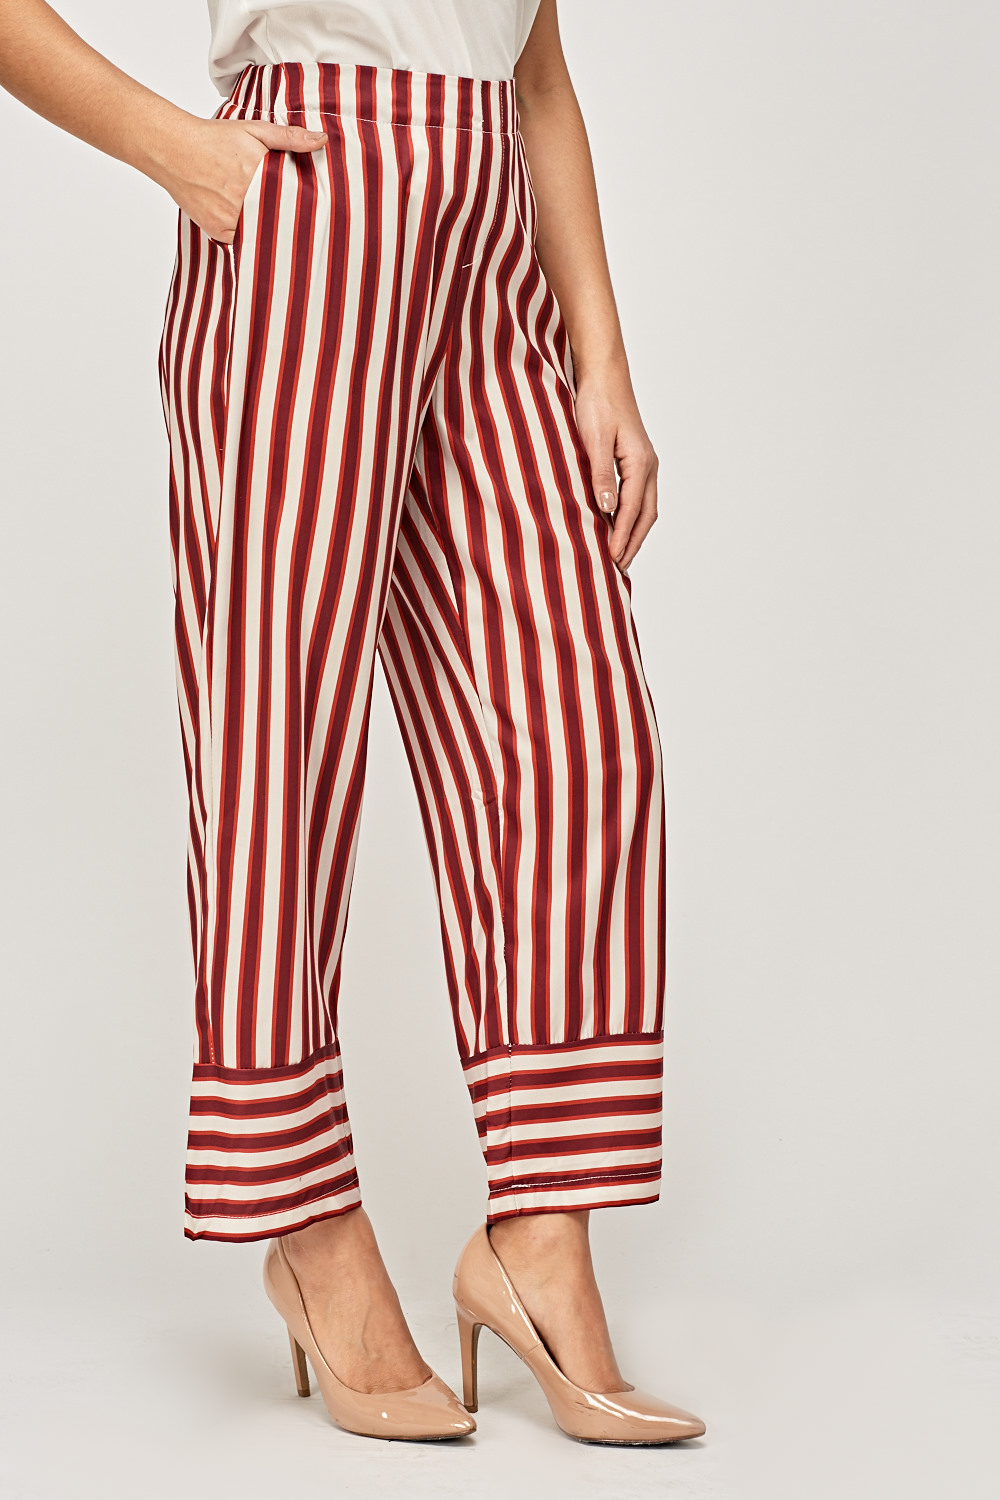 Striped Sateen Basic Trousers - Just $6